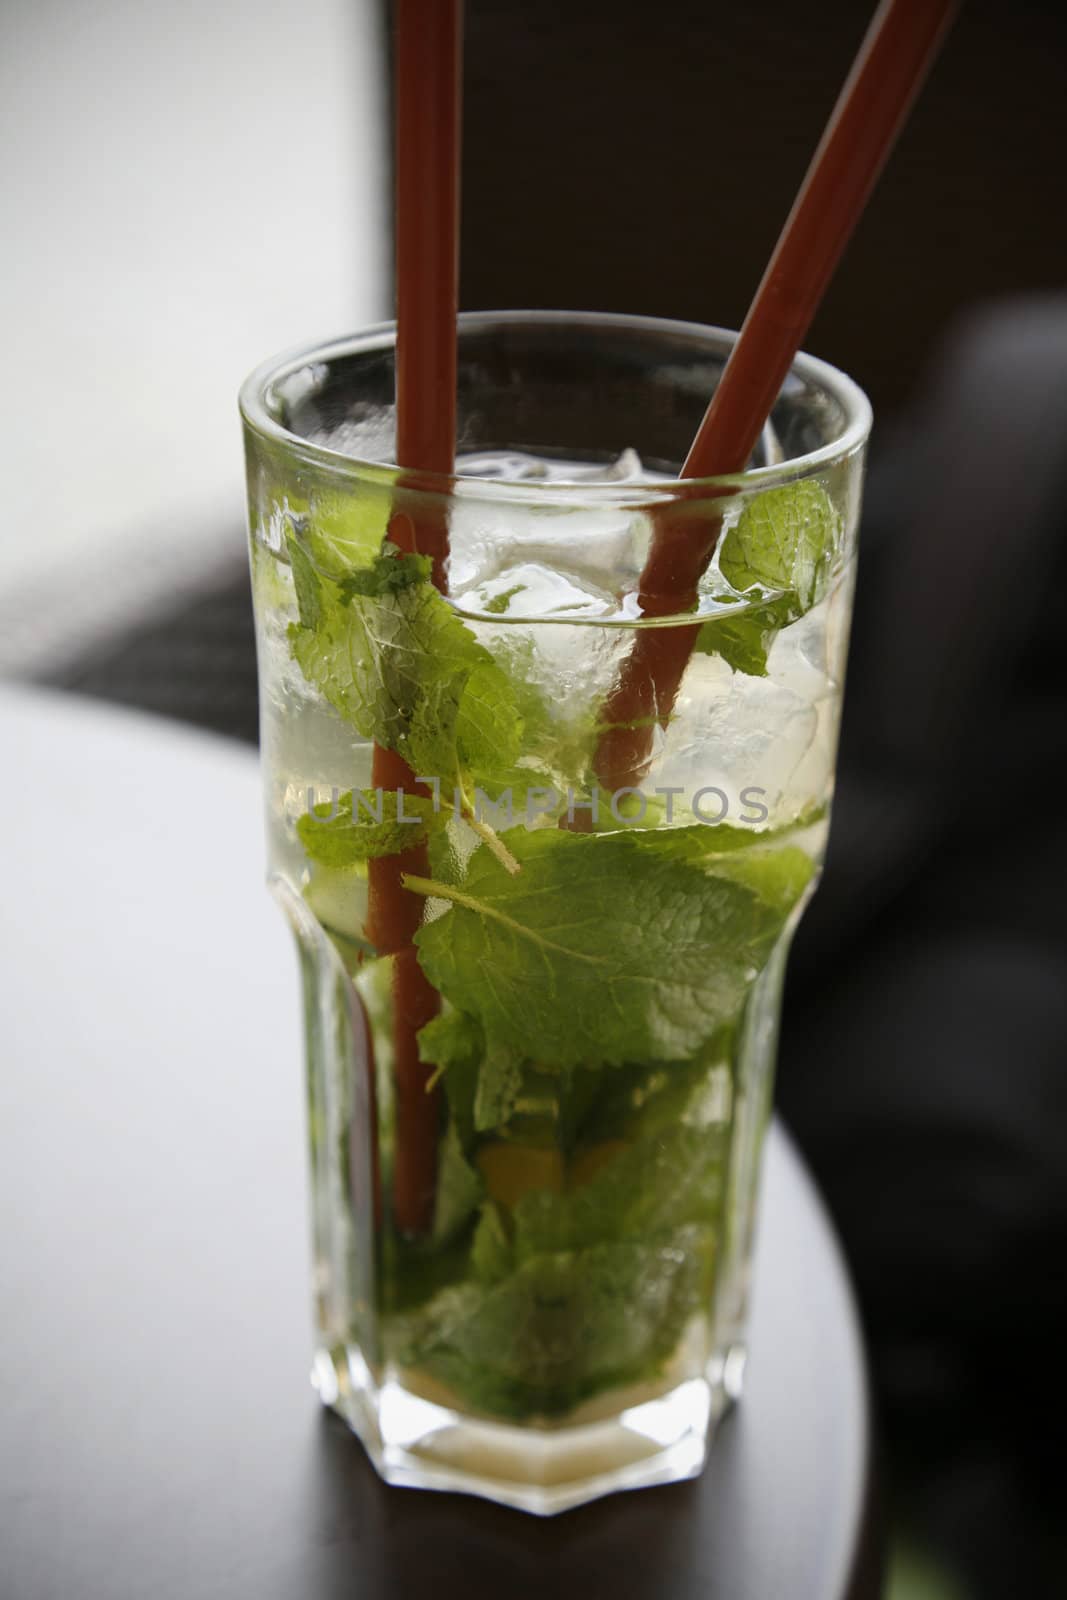 Nice cold Mojito long drink on cafe table at summertime.